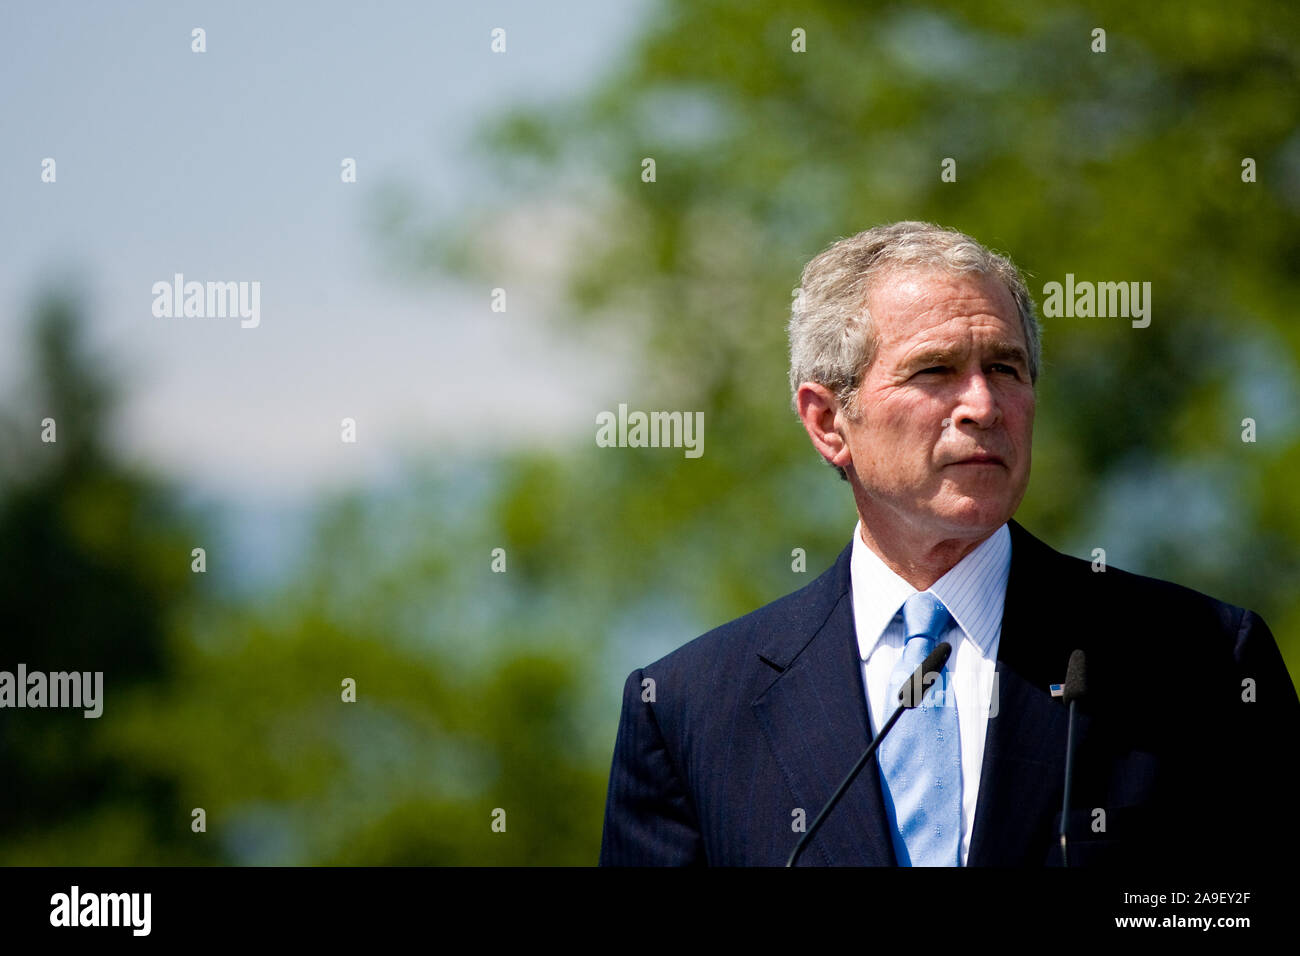 Brdo, Kranj, Slovenia, June 10, 2008: The States President George W. Bush speaks at a press conference at during the EU-US Summit in 2008. Stock Photo